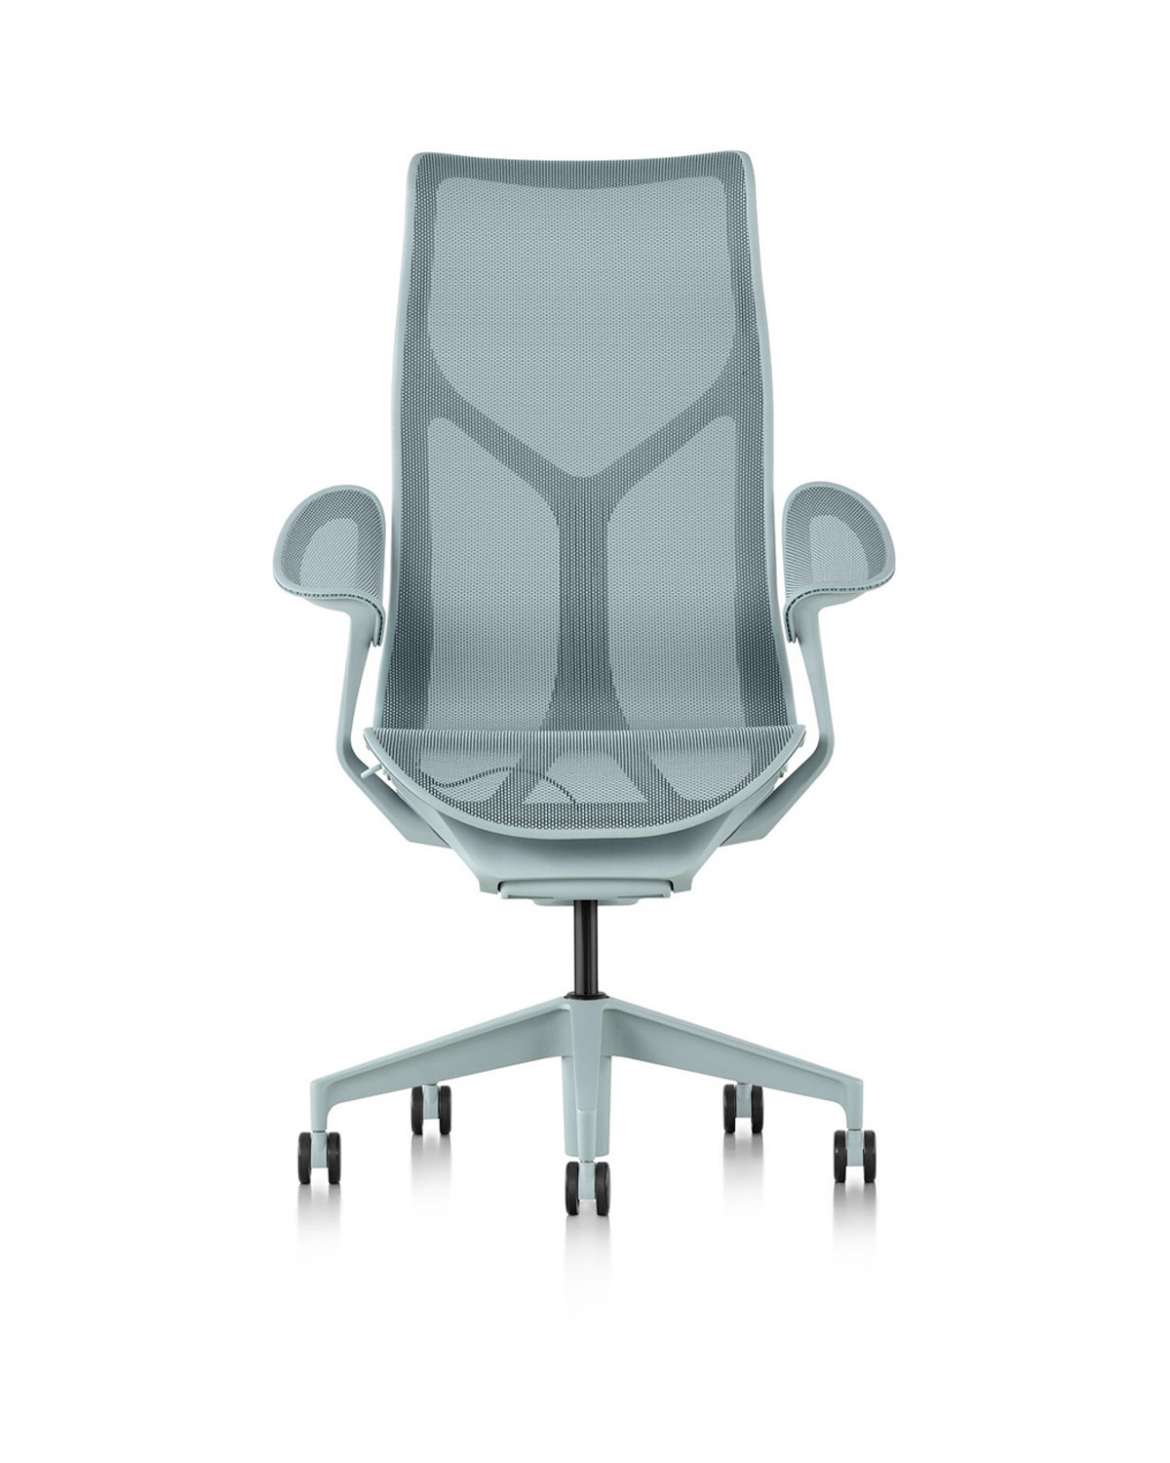 Sit Smart, Work Well: The Science Of Ergonomic Chairs In Comfort And Health